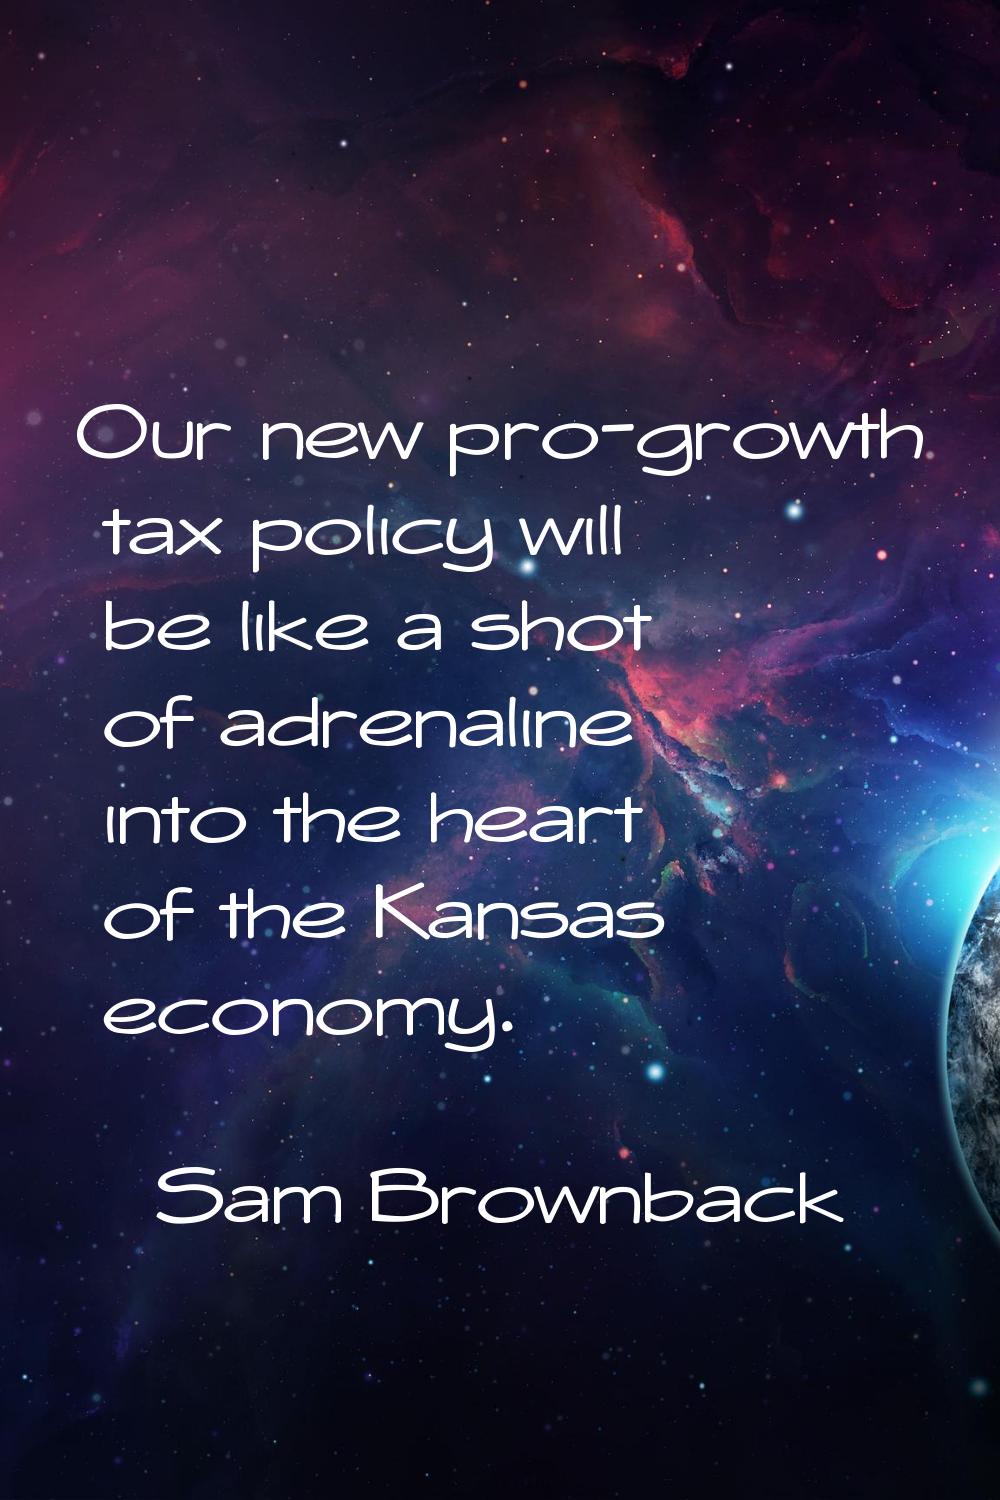 Our new pro-growth tax policy will be like a shot of adrenaline into the heart of the Kansas econom